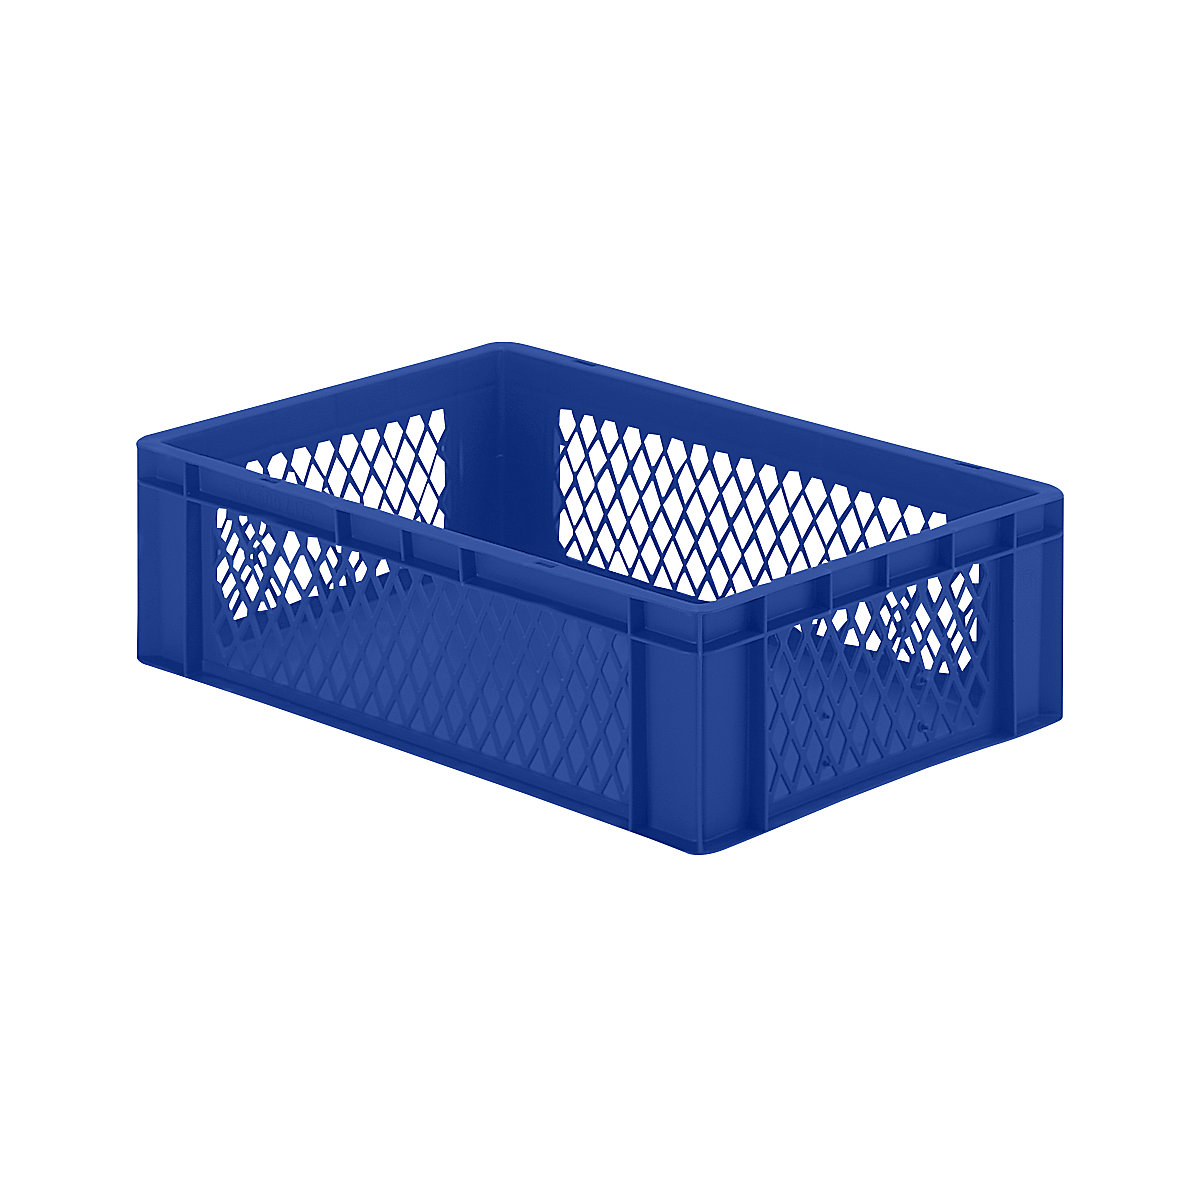 Euro stacking container, perforated walls, closed base, LxWxH 600 x 400 x 175 mm, blue, pack of 5